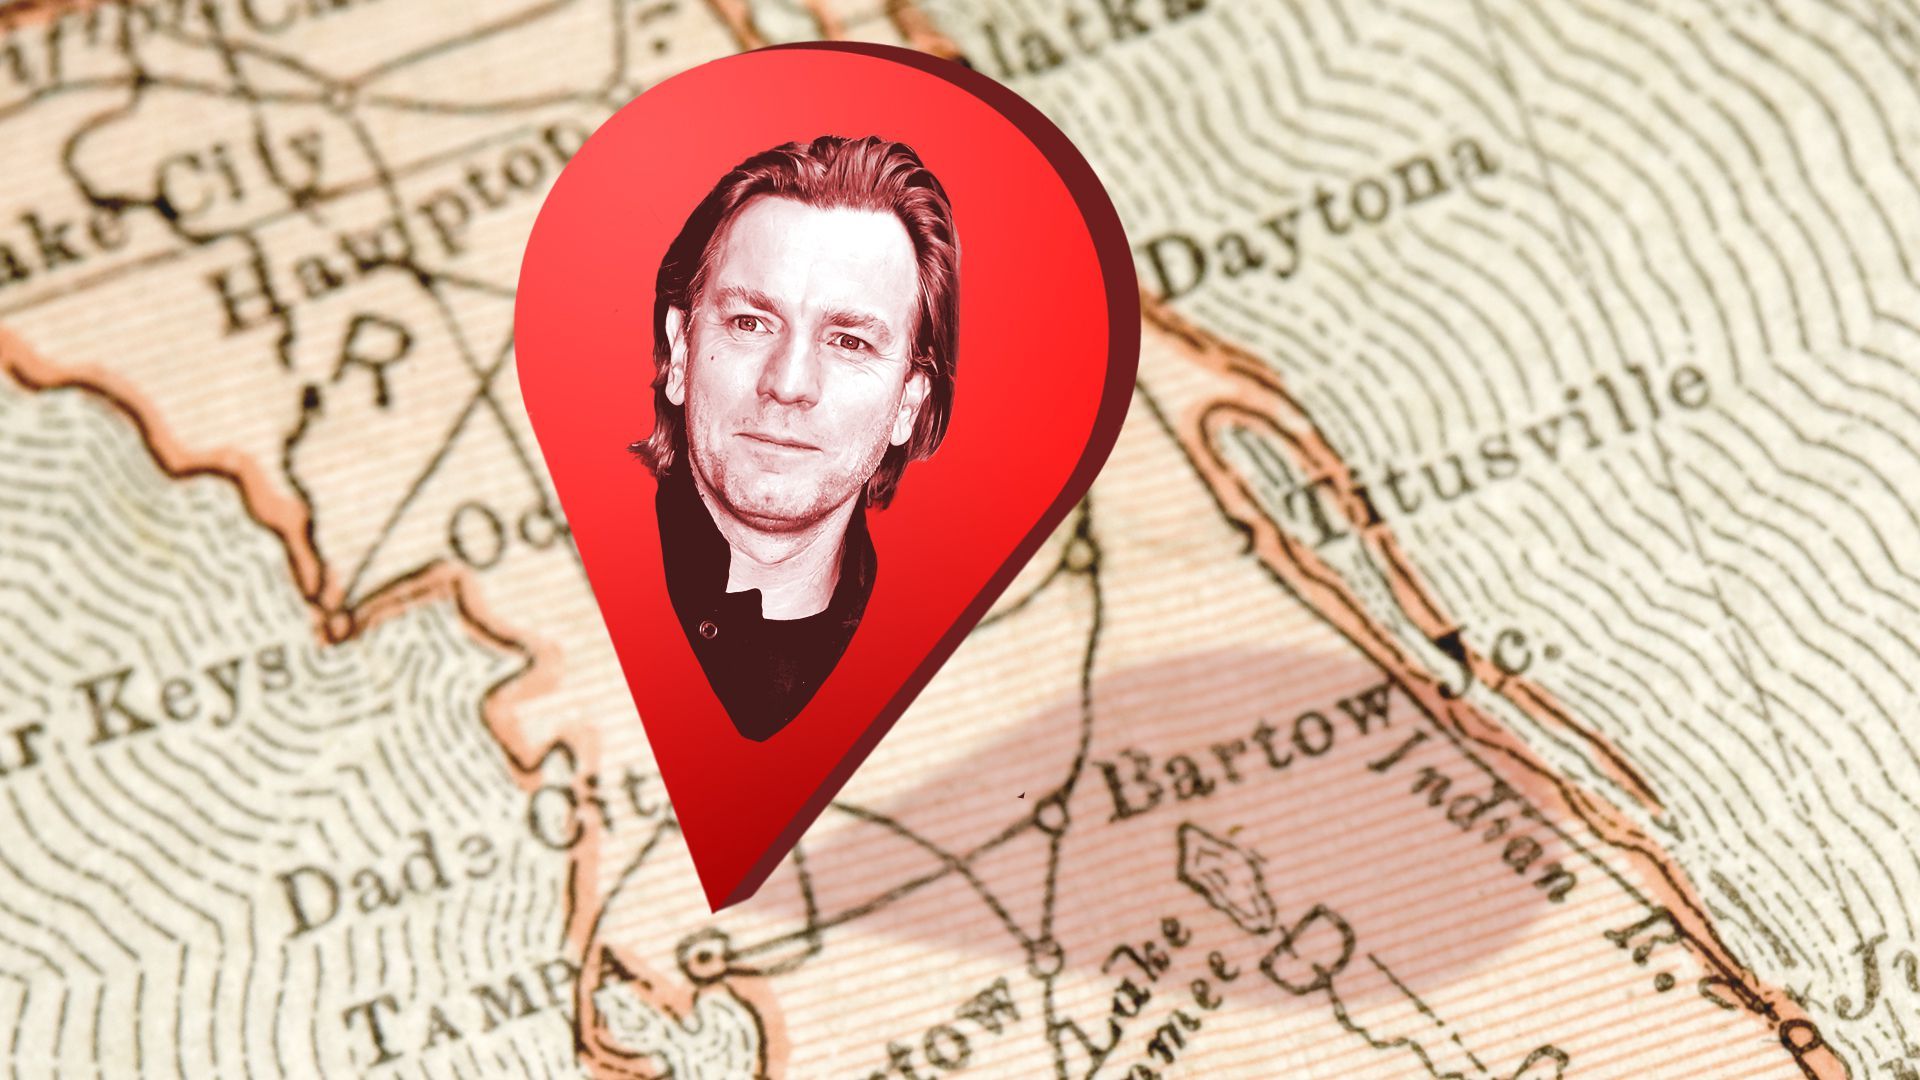 Photo illustration of Ewan McGregor inside of a location pin hovering over Tampa Bay.